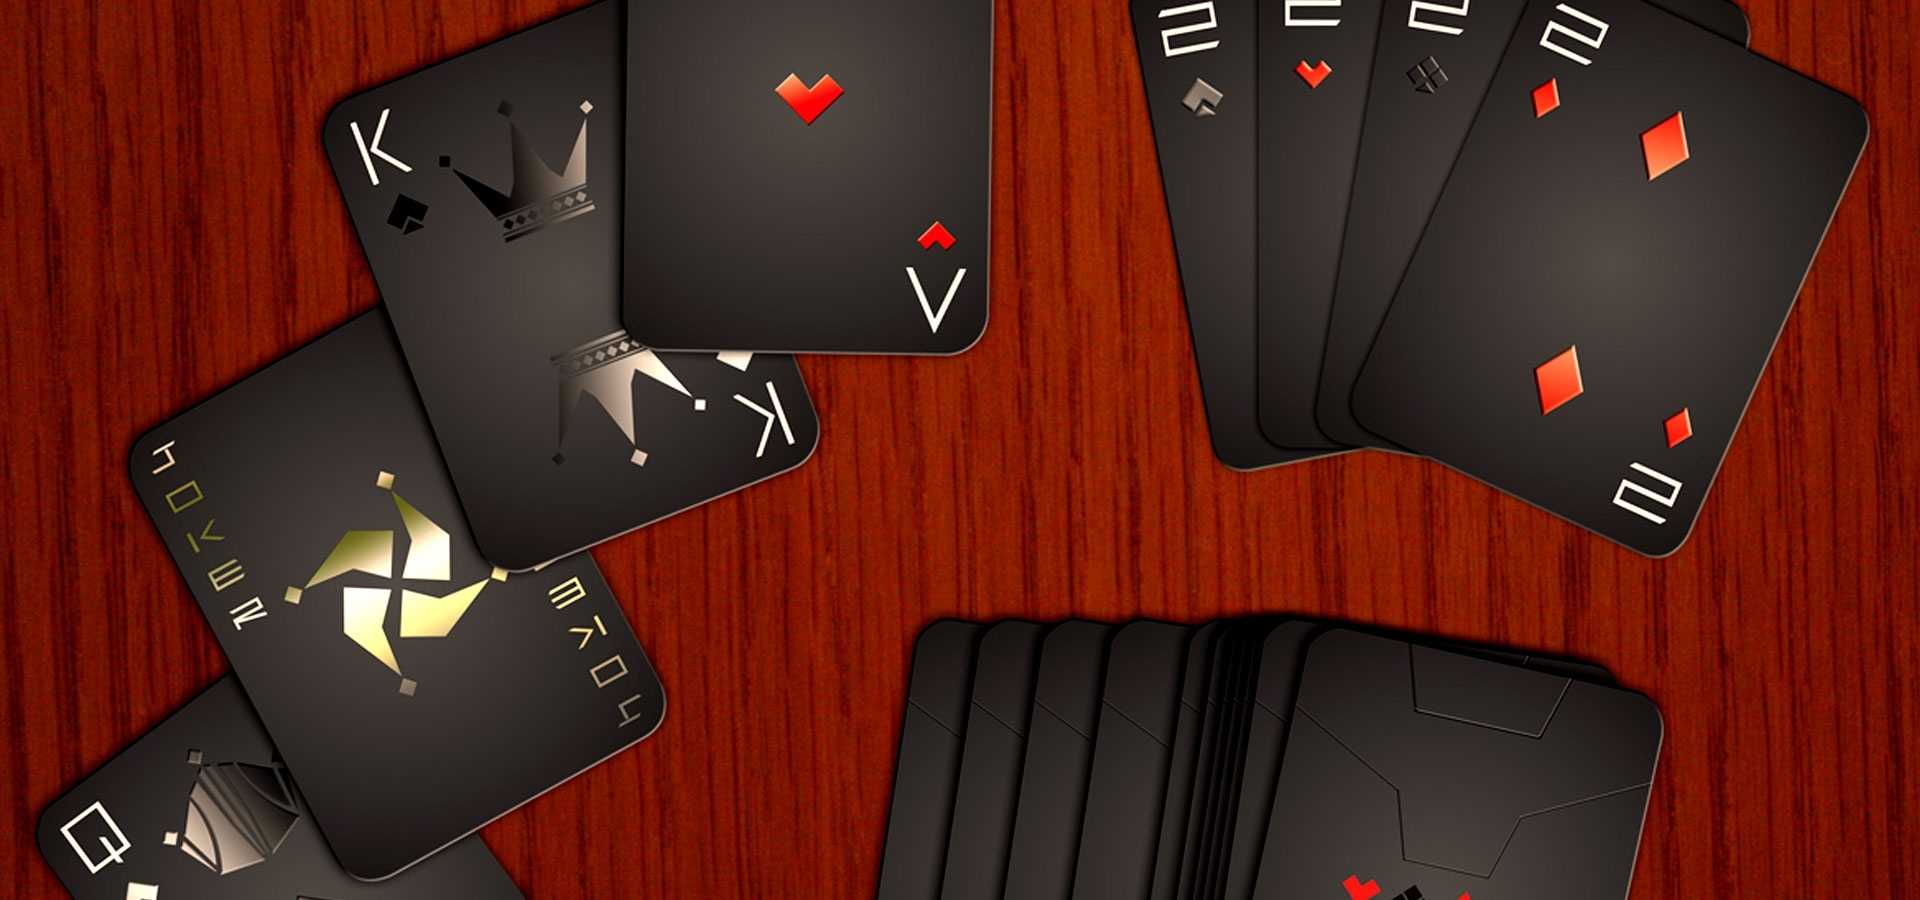 22+ Playing Card Designs | Free & Premium Templates With Regard To Playing Card Template Illustrator